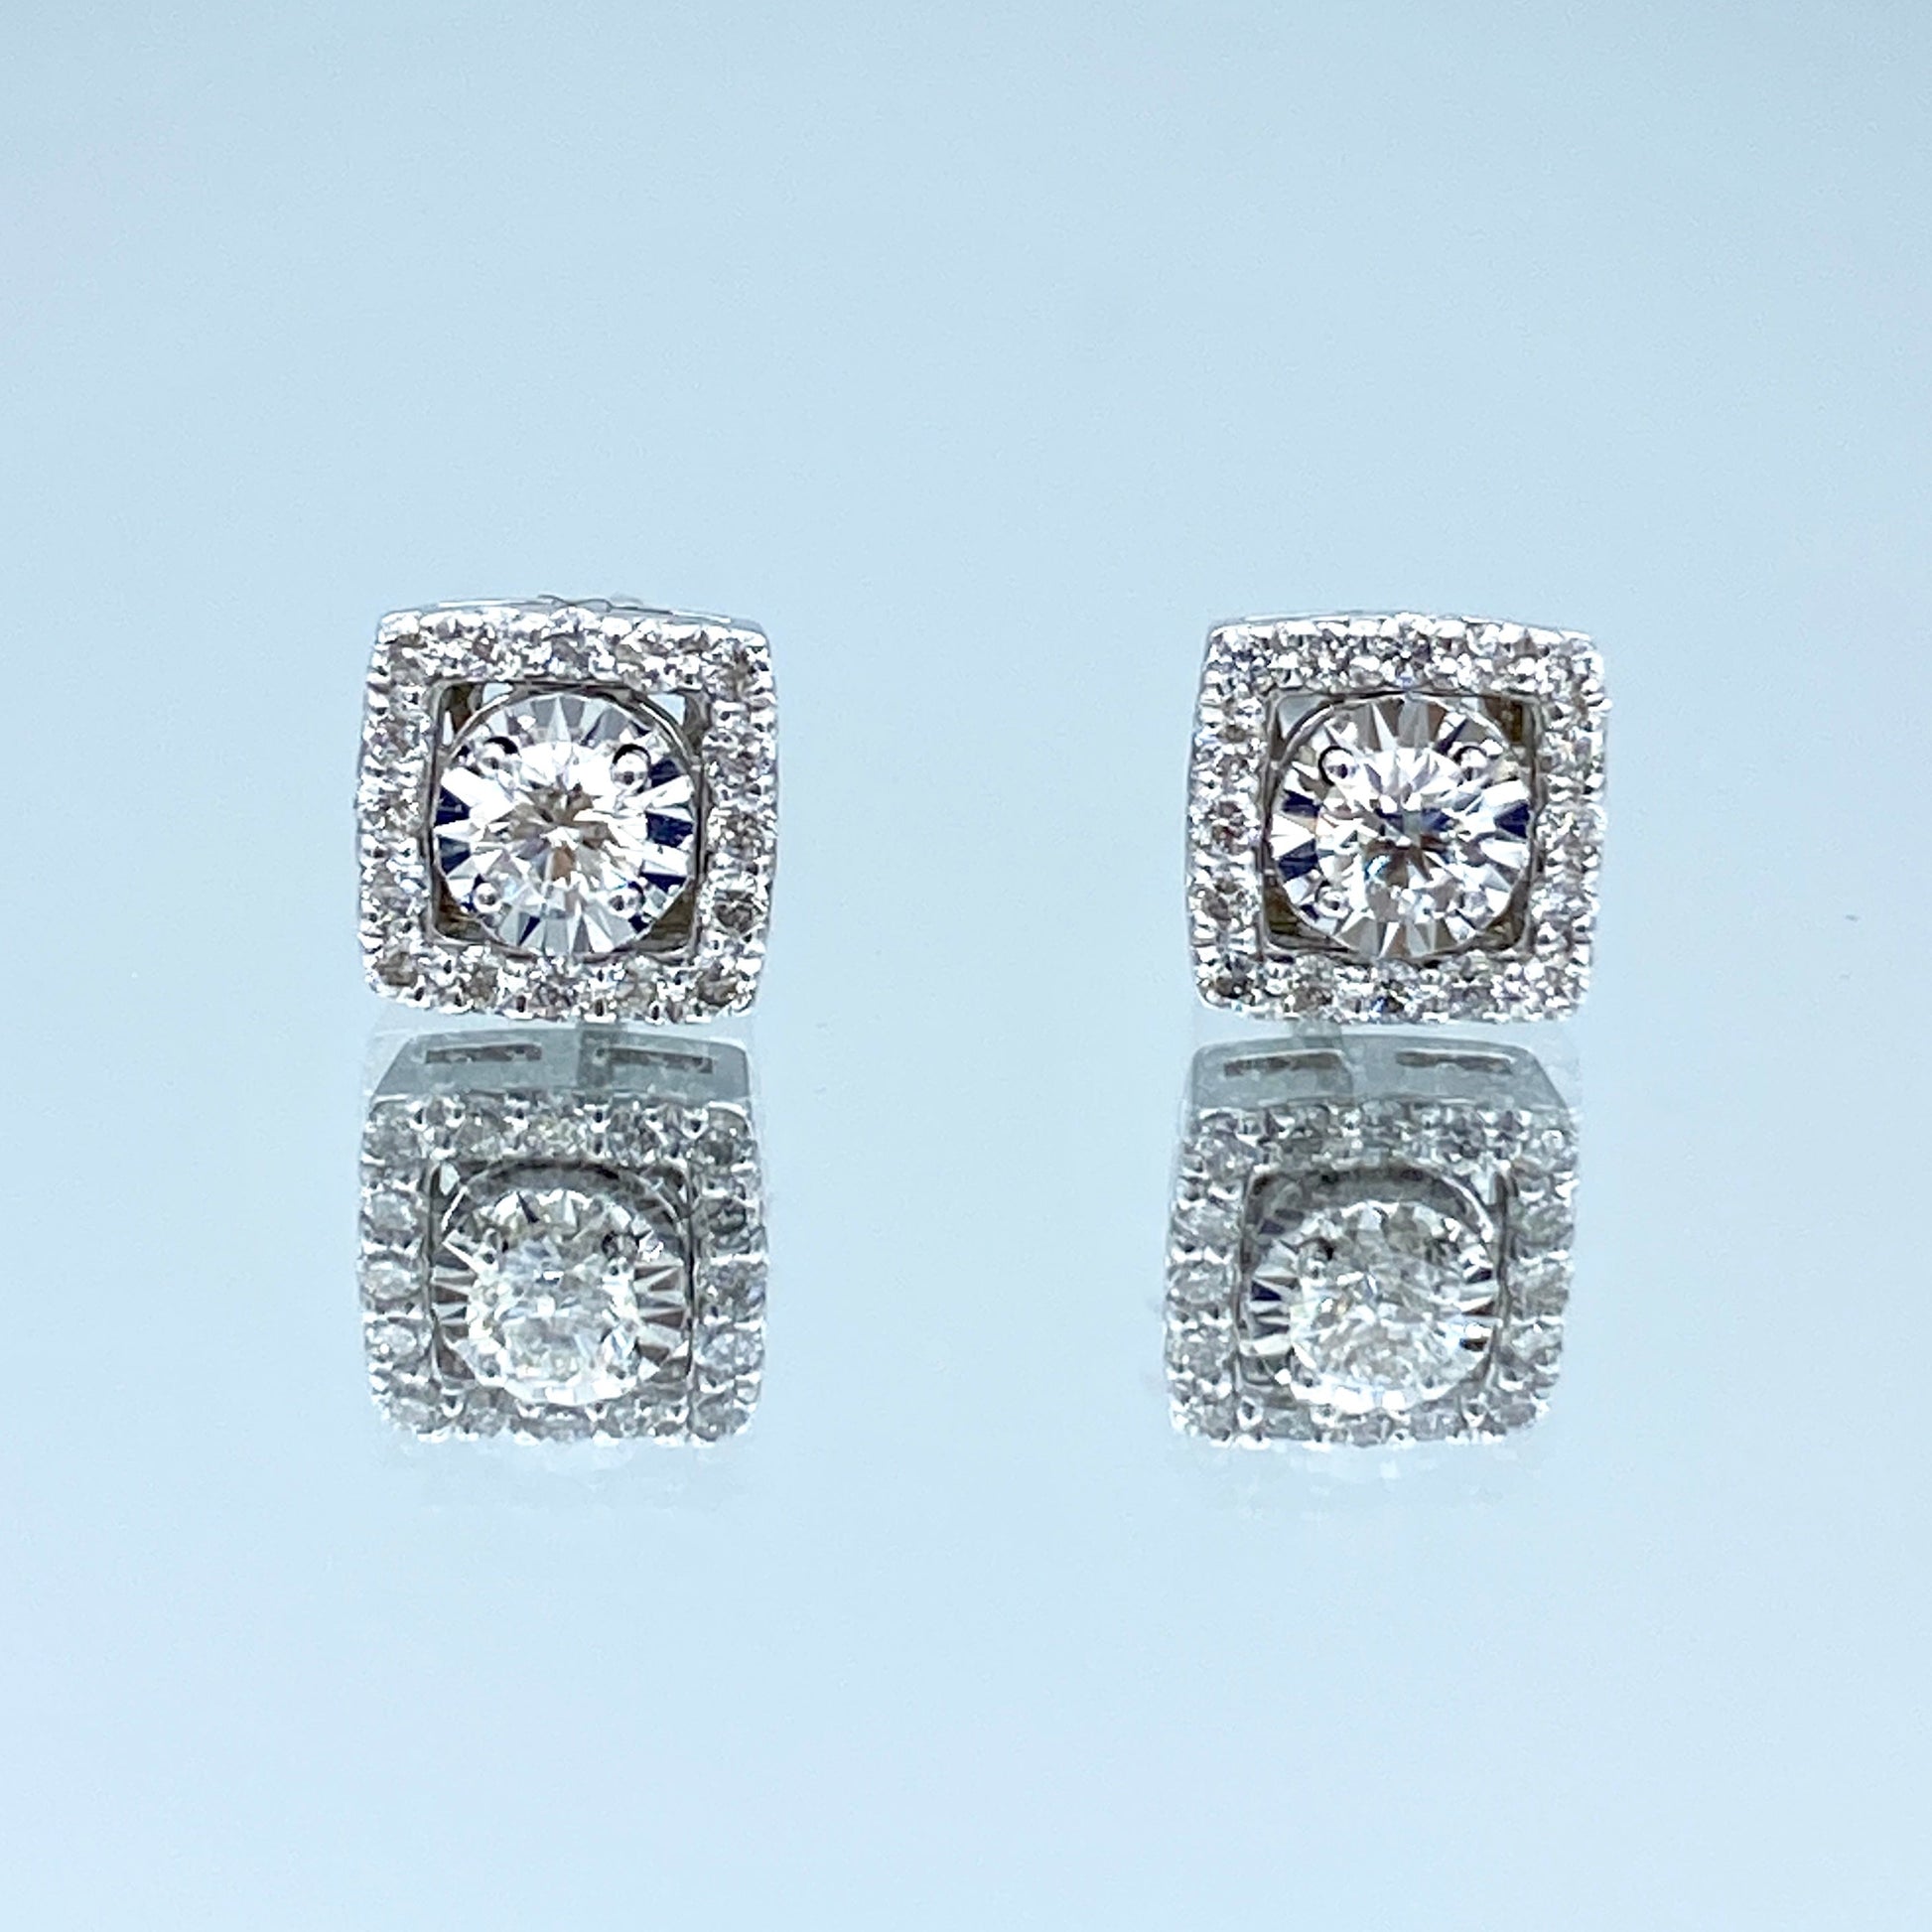 Square Halo Diamond Stud Earrings in 14K White Gold - L and L Jewelry